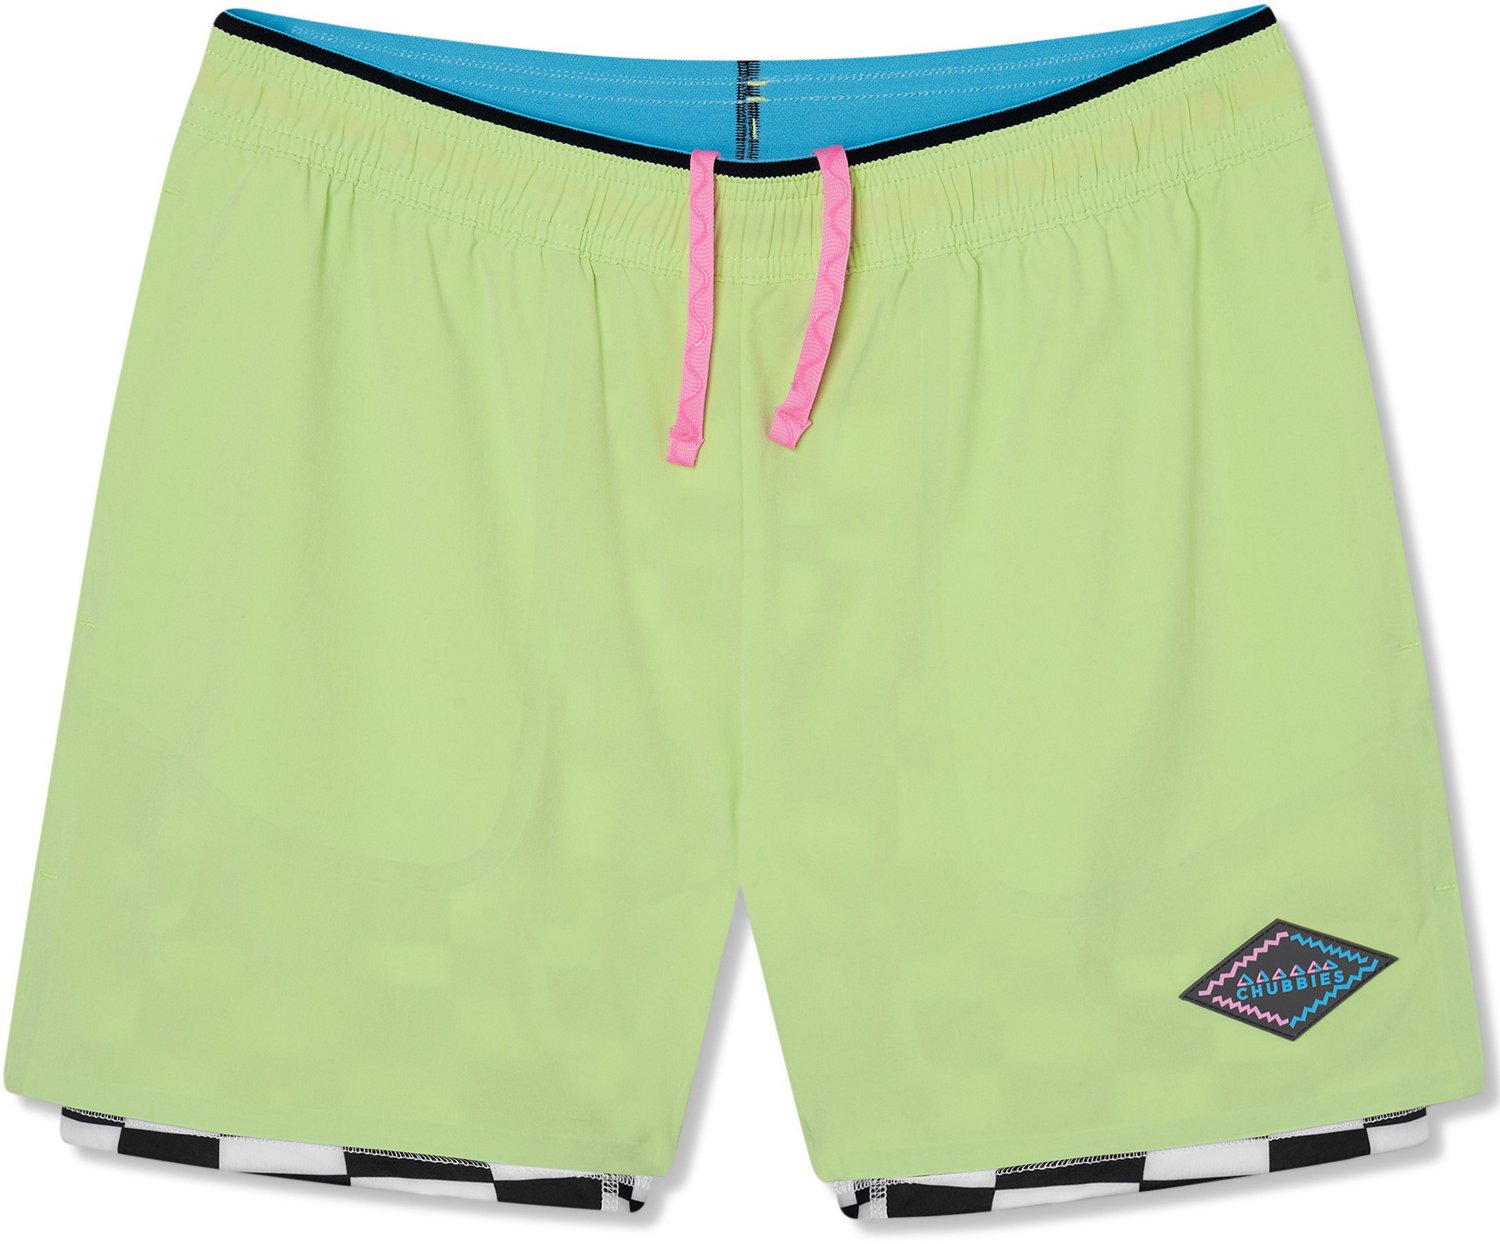 Chubbies Men's Funk Riders Ultimate Training Shorts 5.5 in | Academy